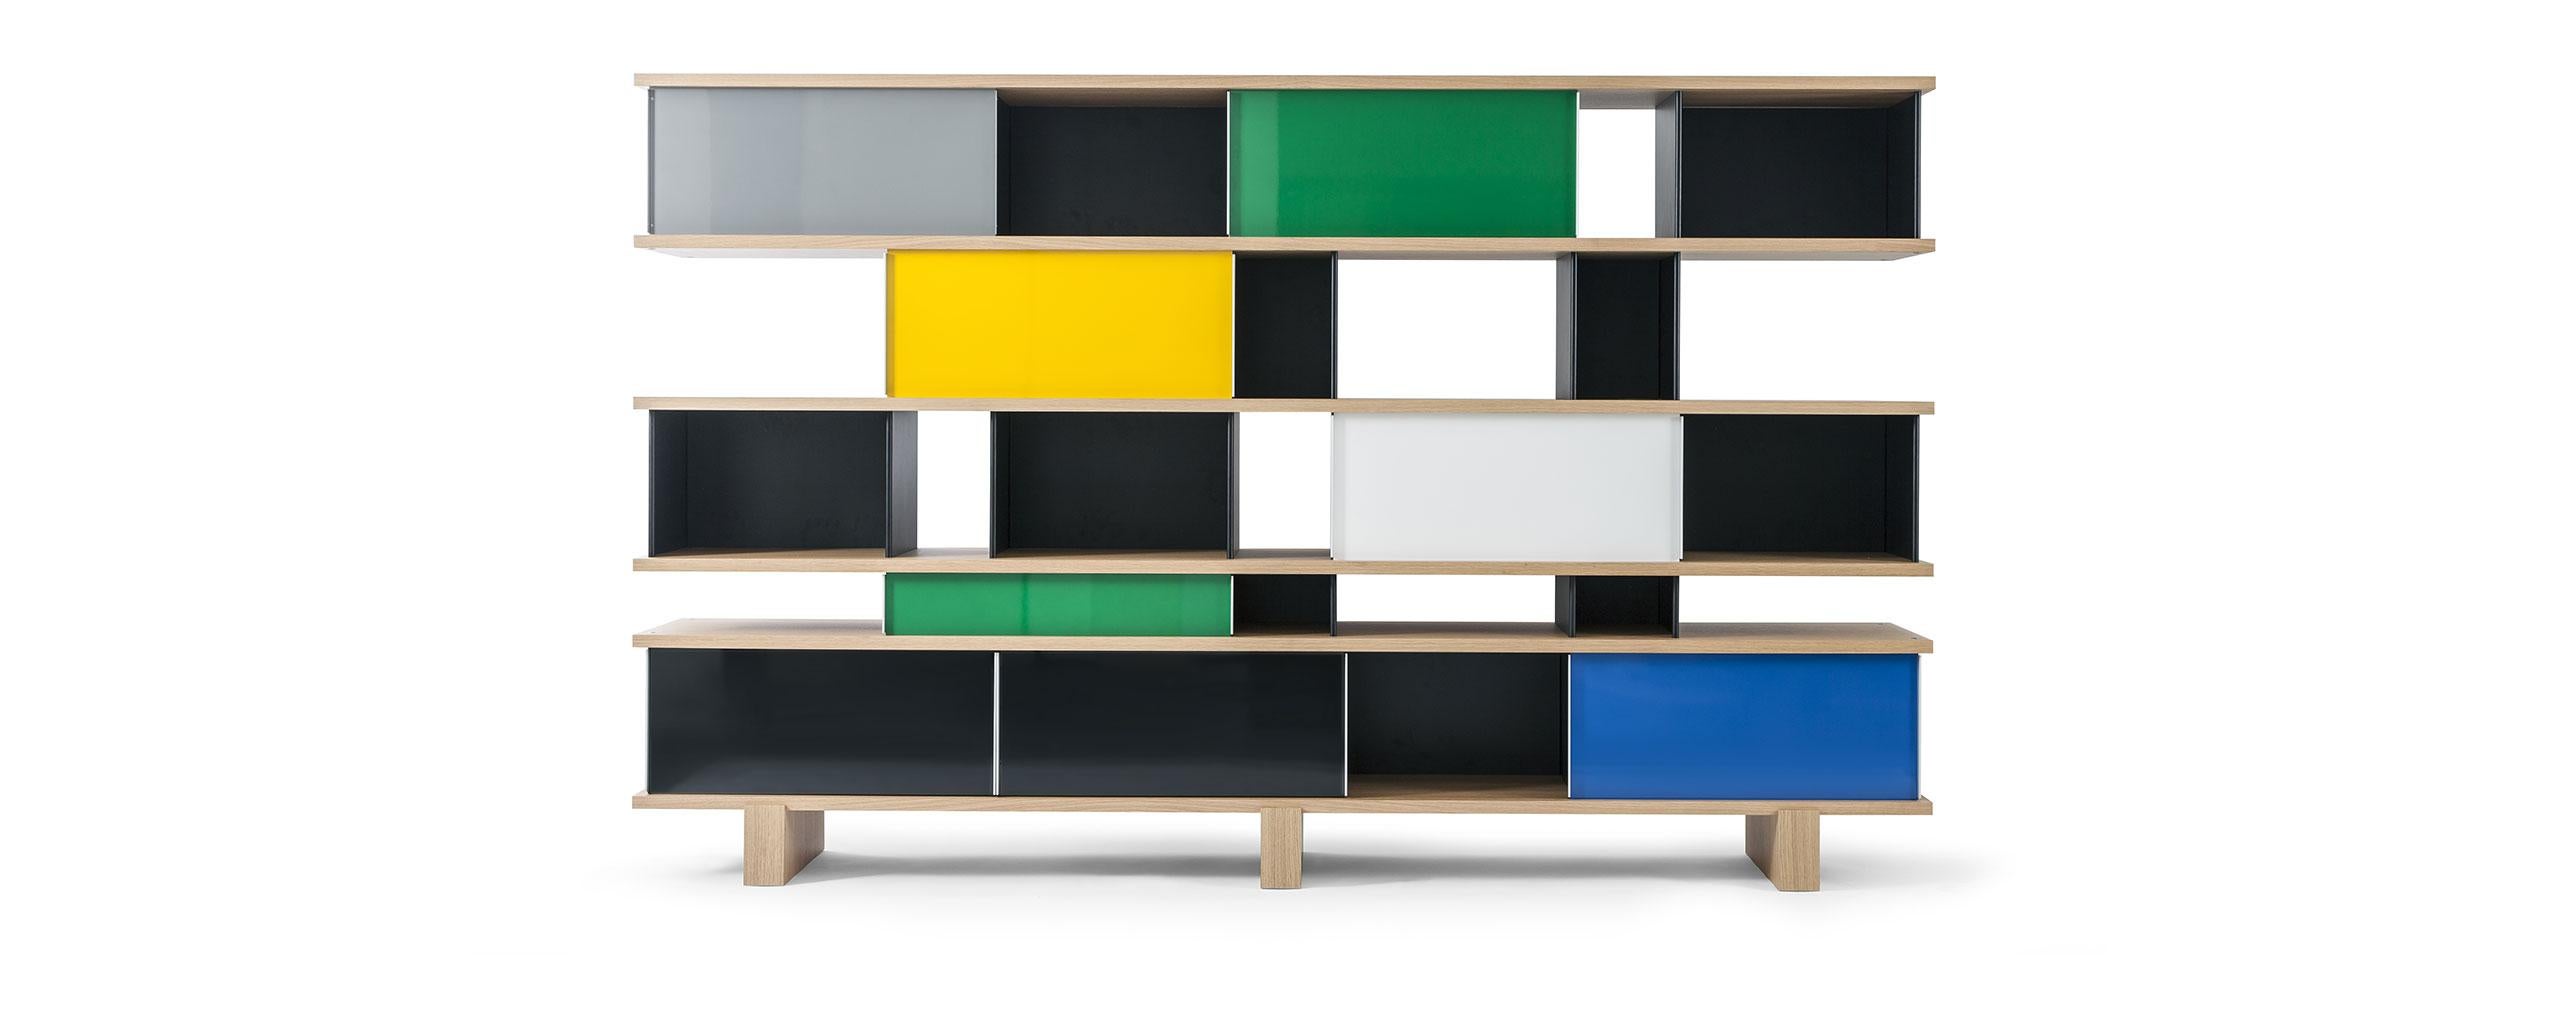 Shelving Unit designed by Charlotte Perriand in 1952-56. Relaunched by Cassina in 2012.
Manufactured by Cassina in Italy.

Authenticity and avant-garde characterise Charlotte Perriand’s Nuage shelving unit from 1940. Drawing on her experience of